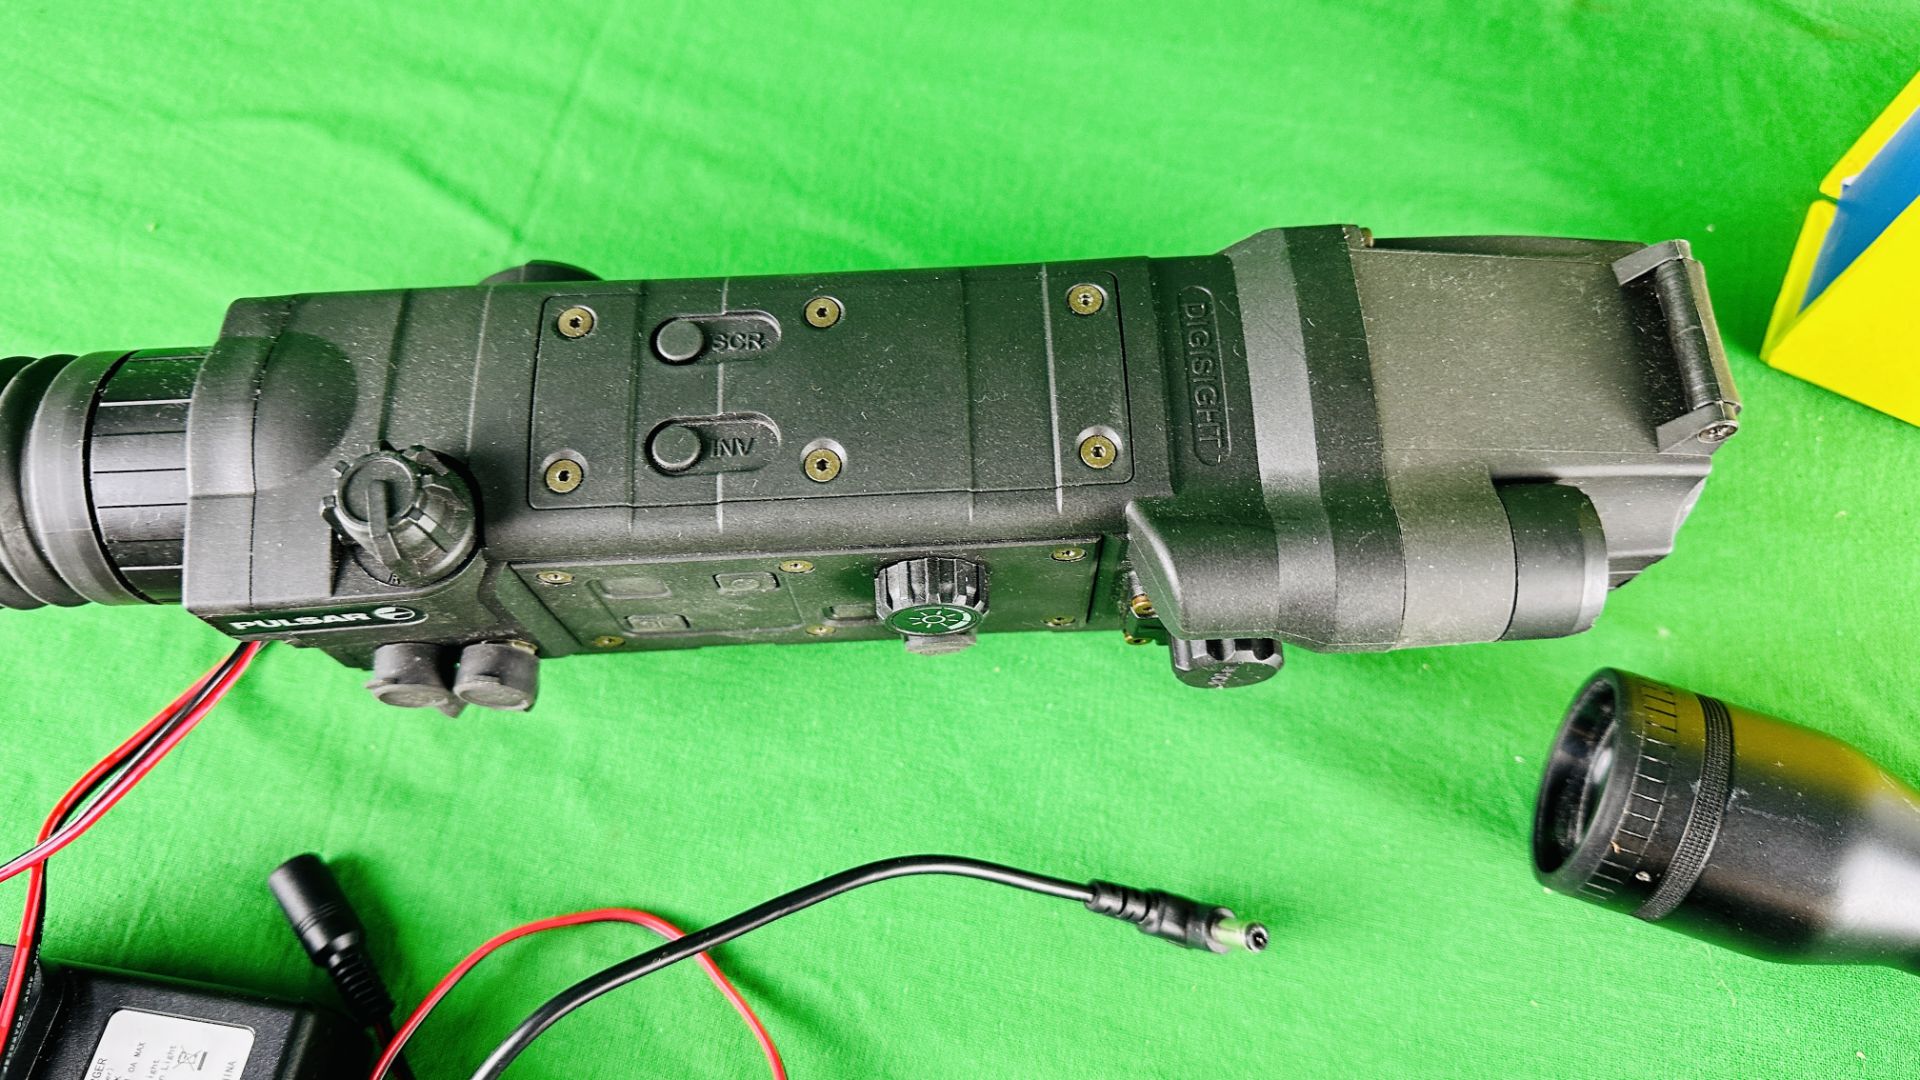 PULSAR DIGISIGHT RIFLE SCOPE, N550, BATTERY, CHARGER, PULSAR IR FLASHLIGHT L-808 - UNTESTED, - Image 5 of 10